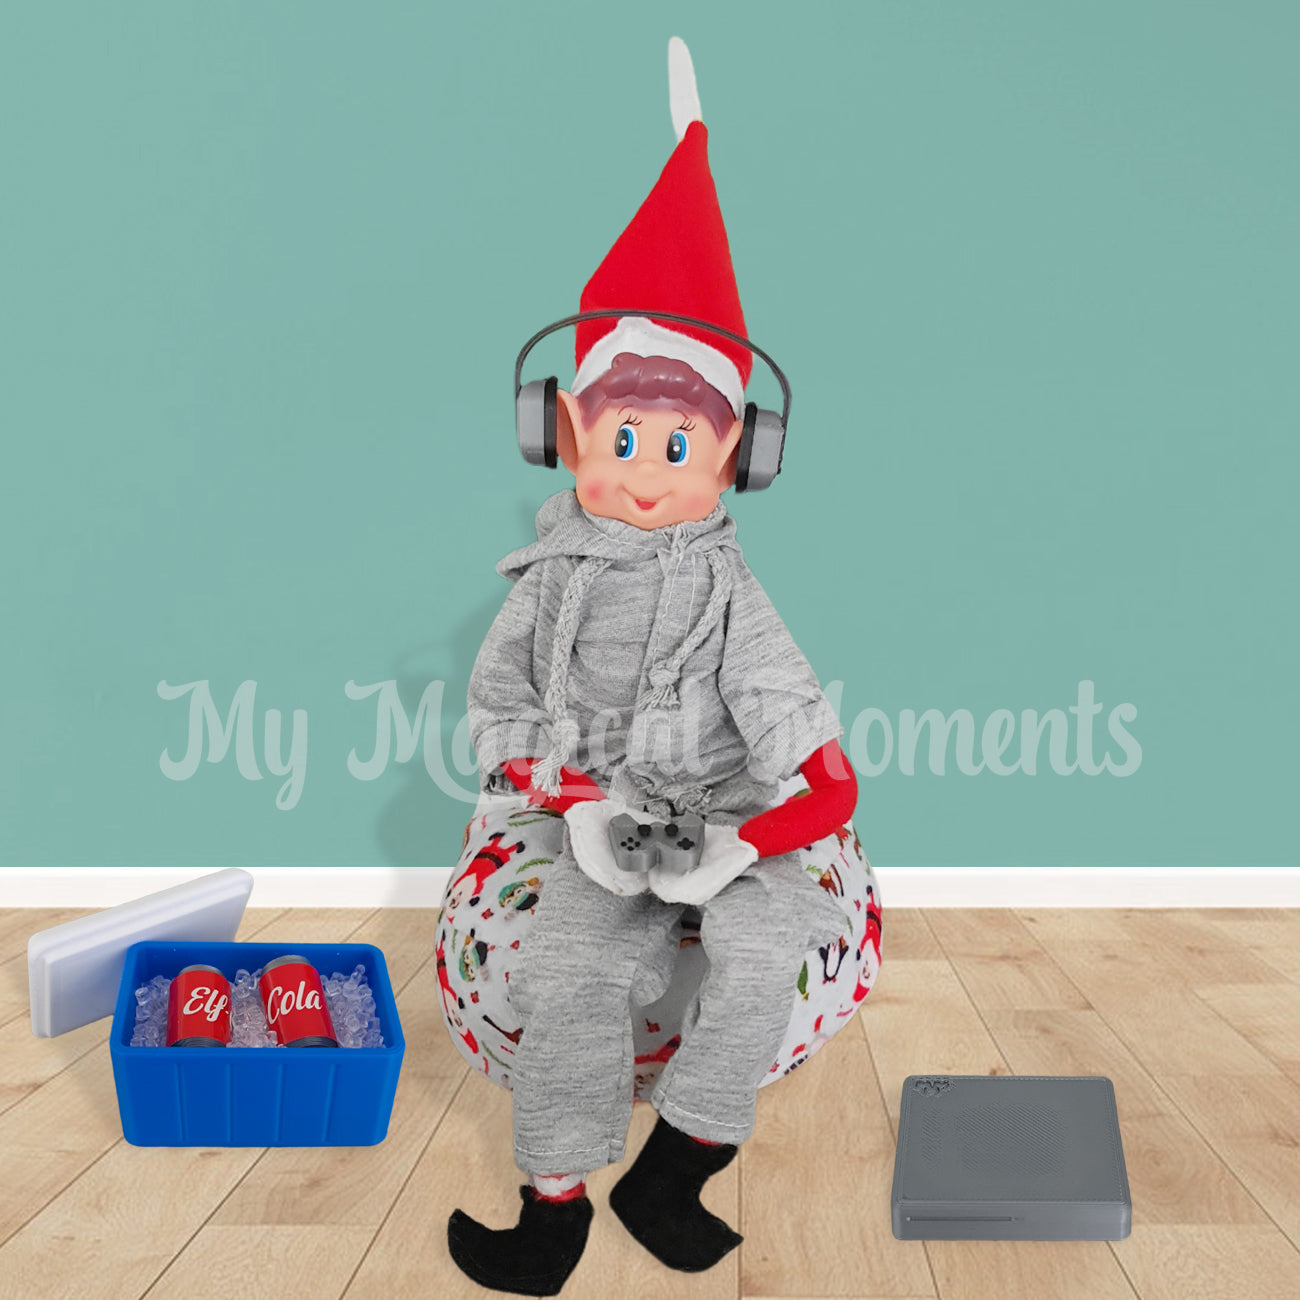 Elves behavin badly gaming in tracksuit with headphones. Esky full of cola is next to his bean bag